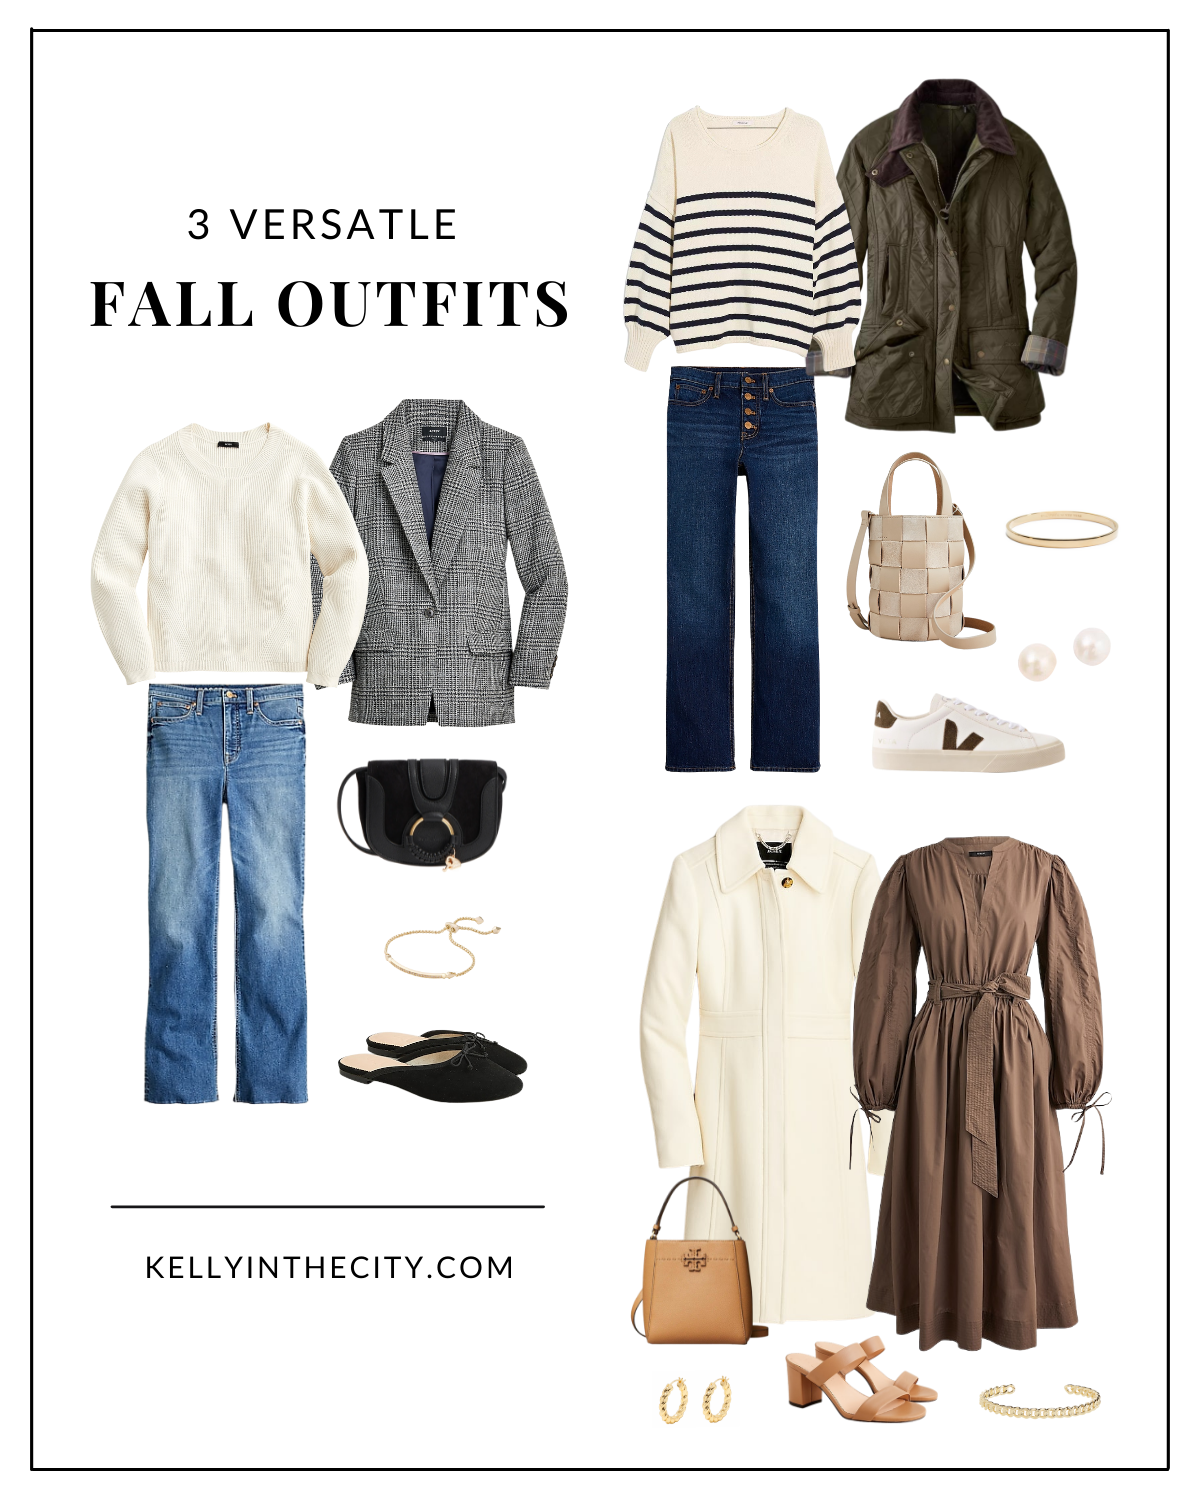 3 Simple Fall Outfit Ideas